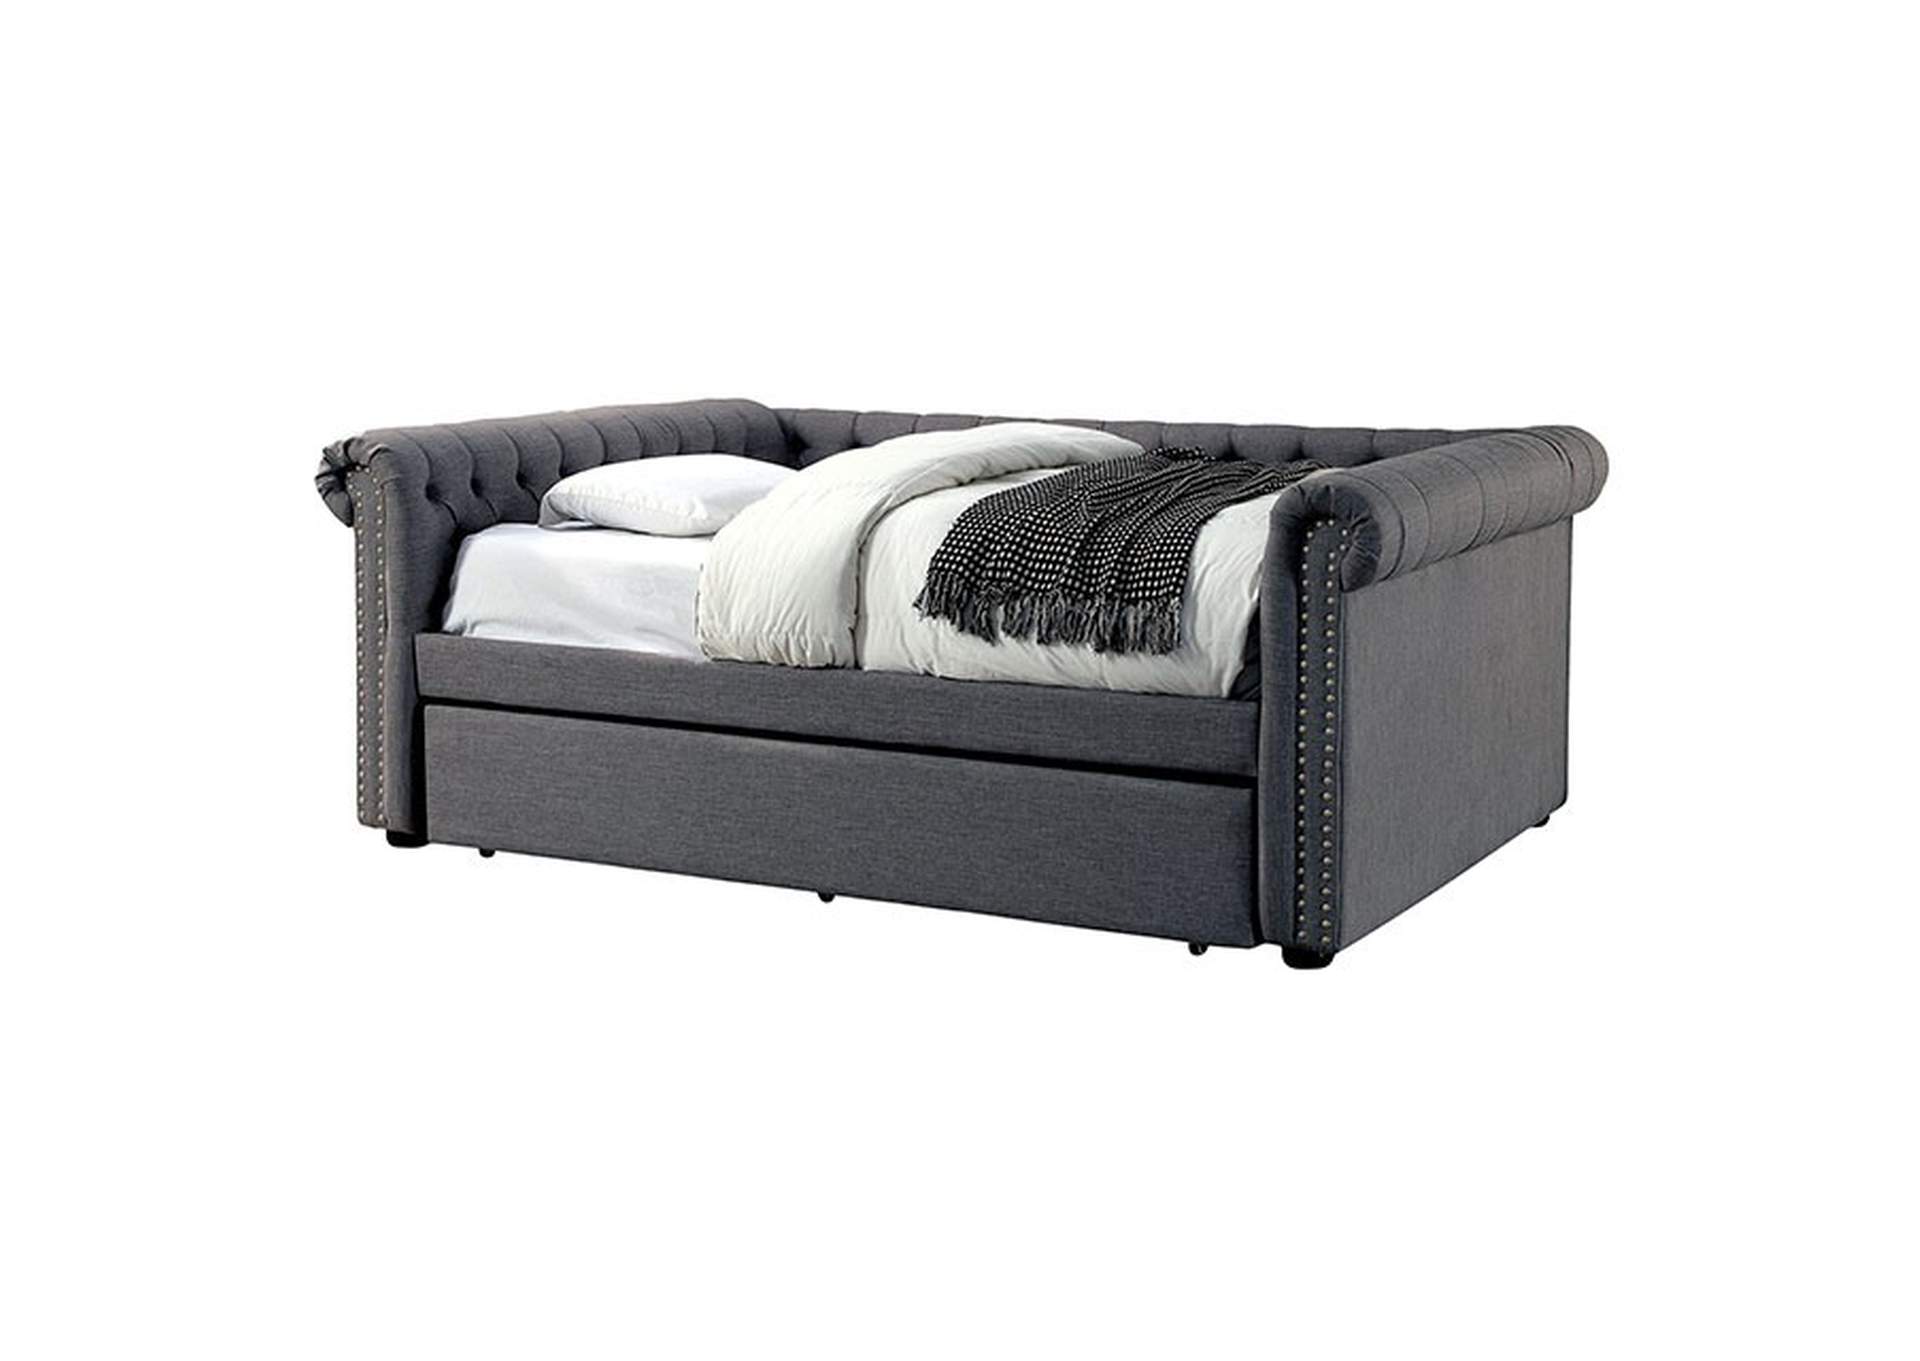 Leanna Full Daybed,Furniture of America